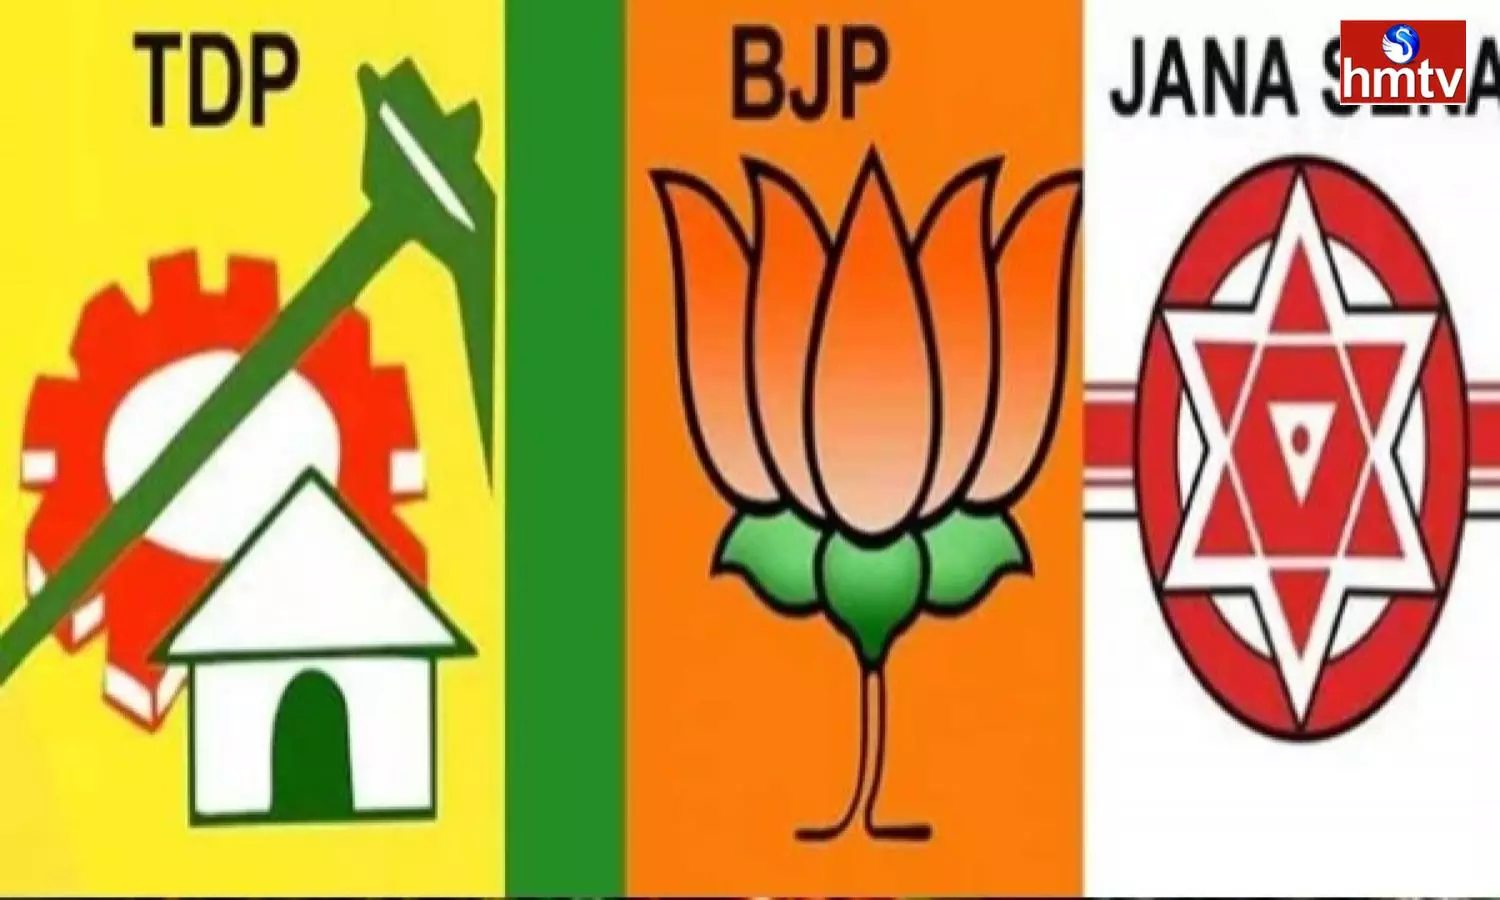 The Alliance of BJP, TDP And Jana Sena is almost finalized